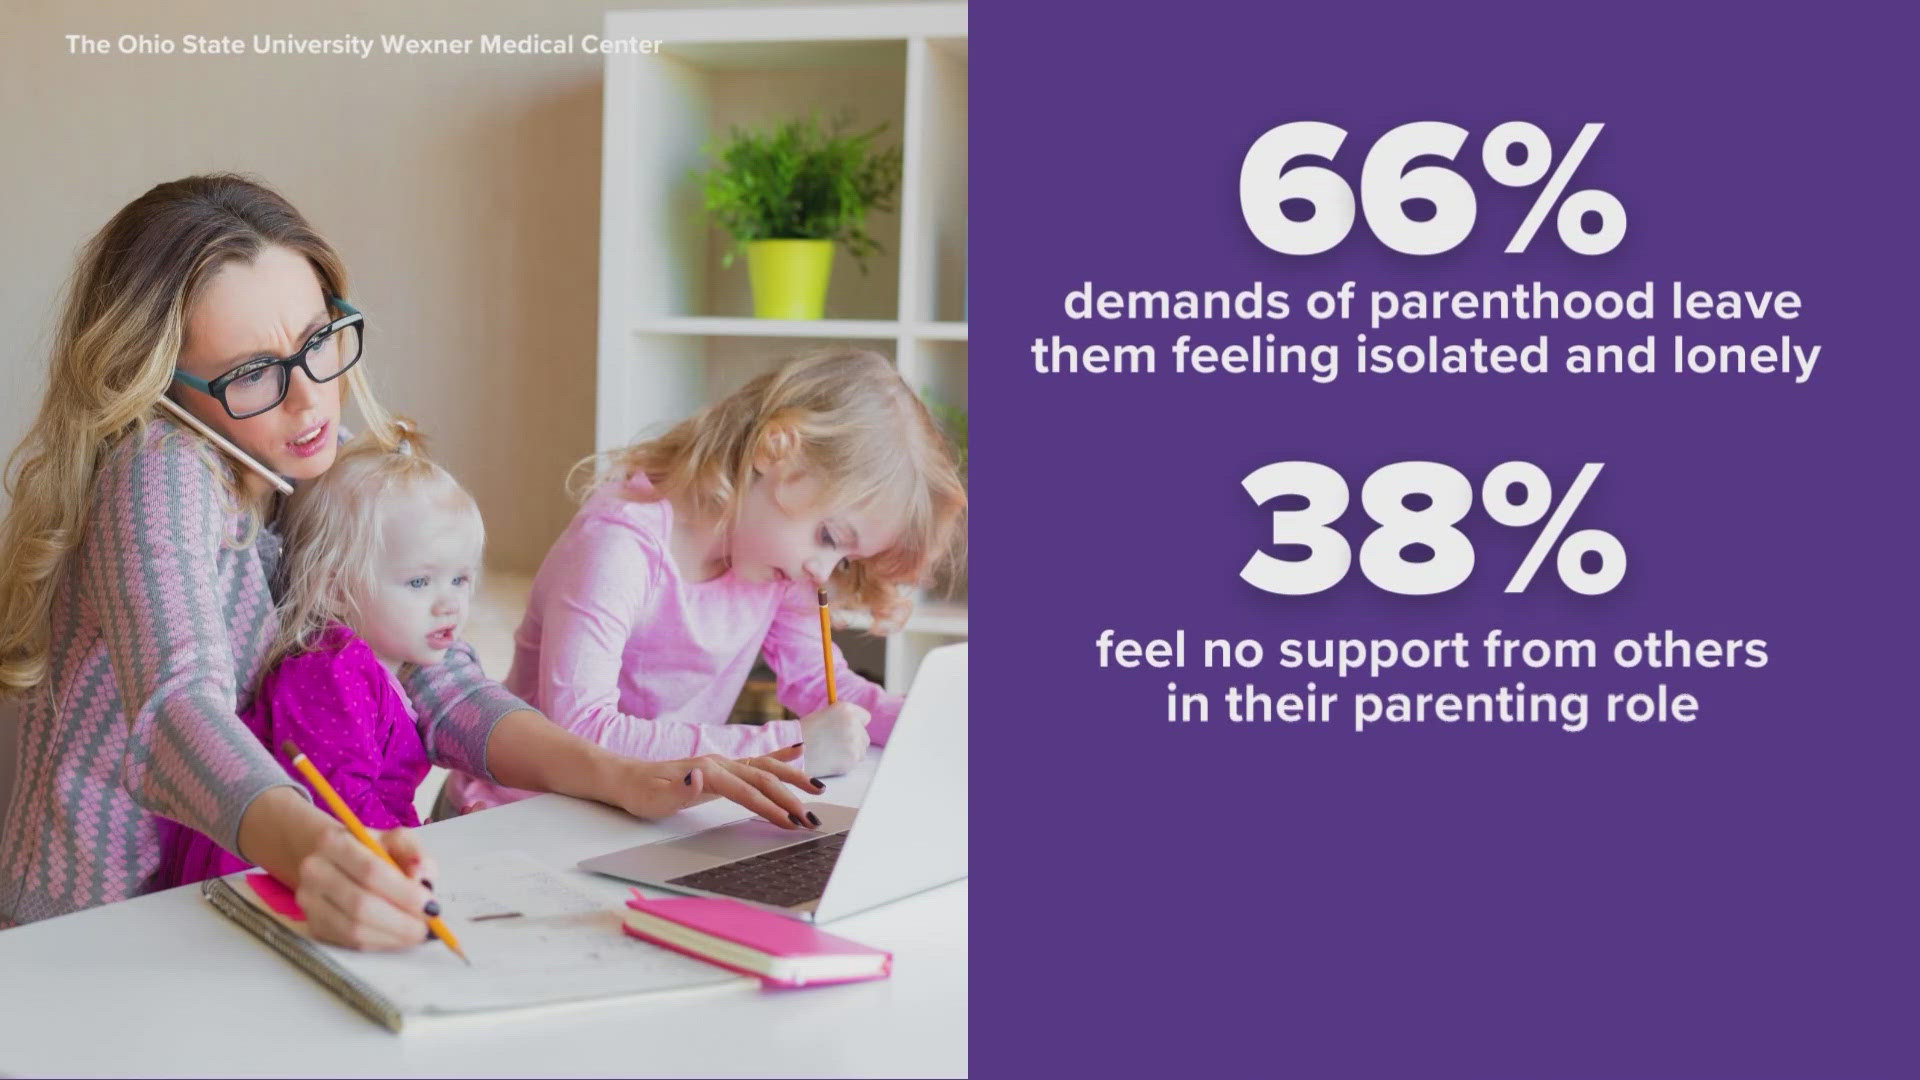 A new survey from the Ohio State University finds most parents say they feel alone and burned out.